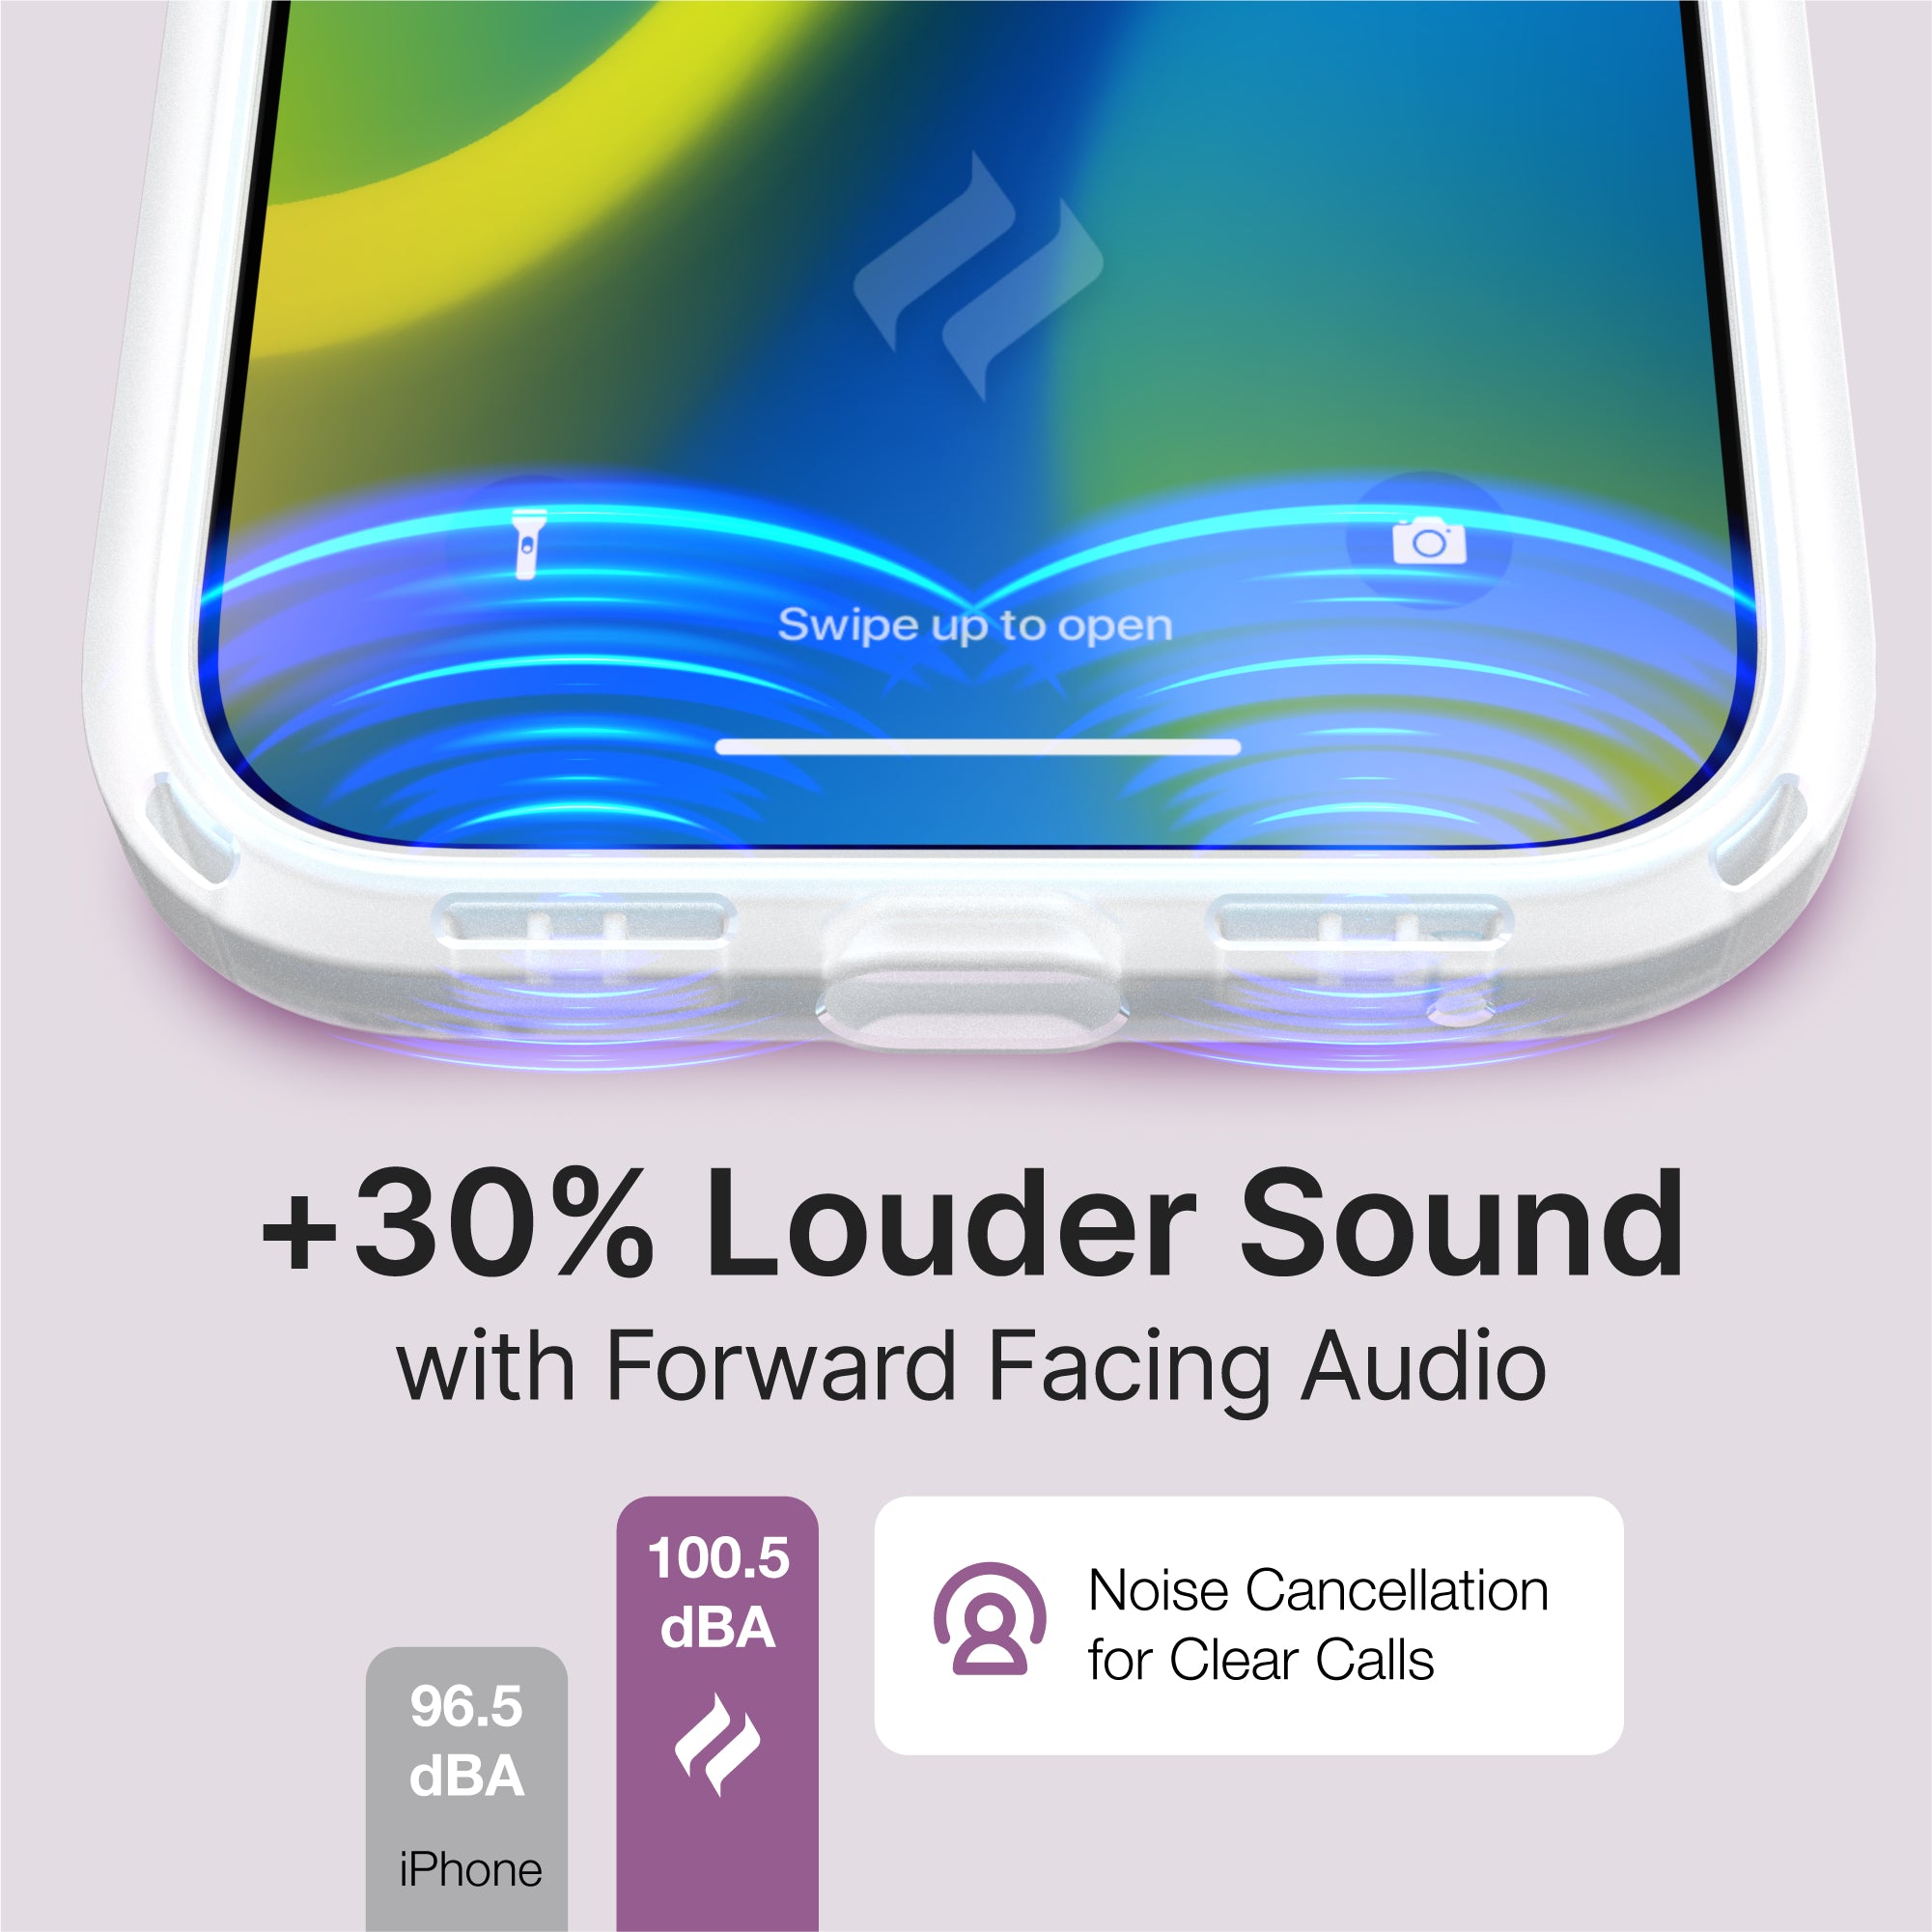 Catalyst iphone 15 series influence case iphone 15 pro max in clear colorway showing the forward facing audio of the case text reads +30% louder sound with forward facing audio 96.5 dBA iphone 100.5 dBA noise cancellation for clear calls